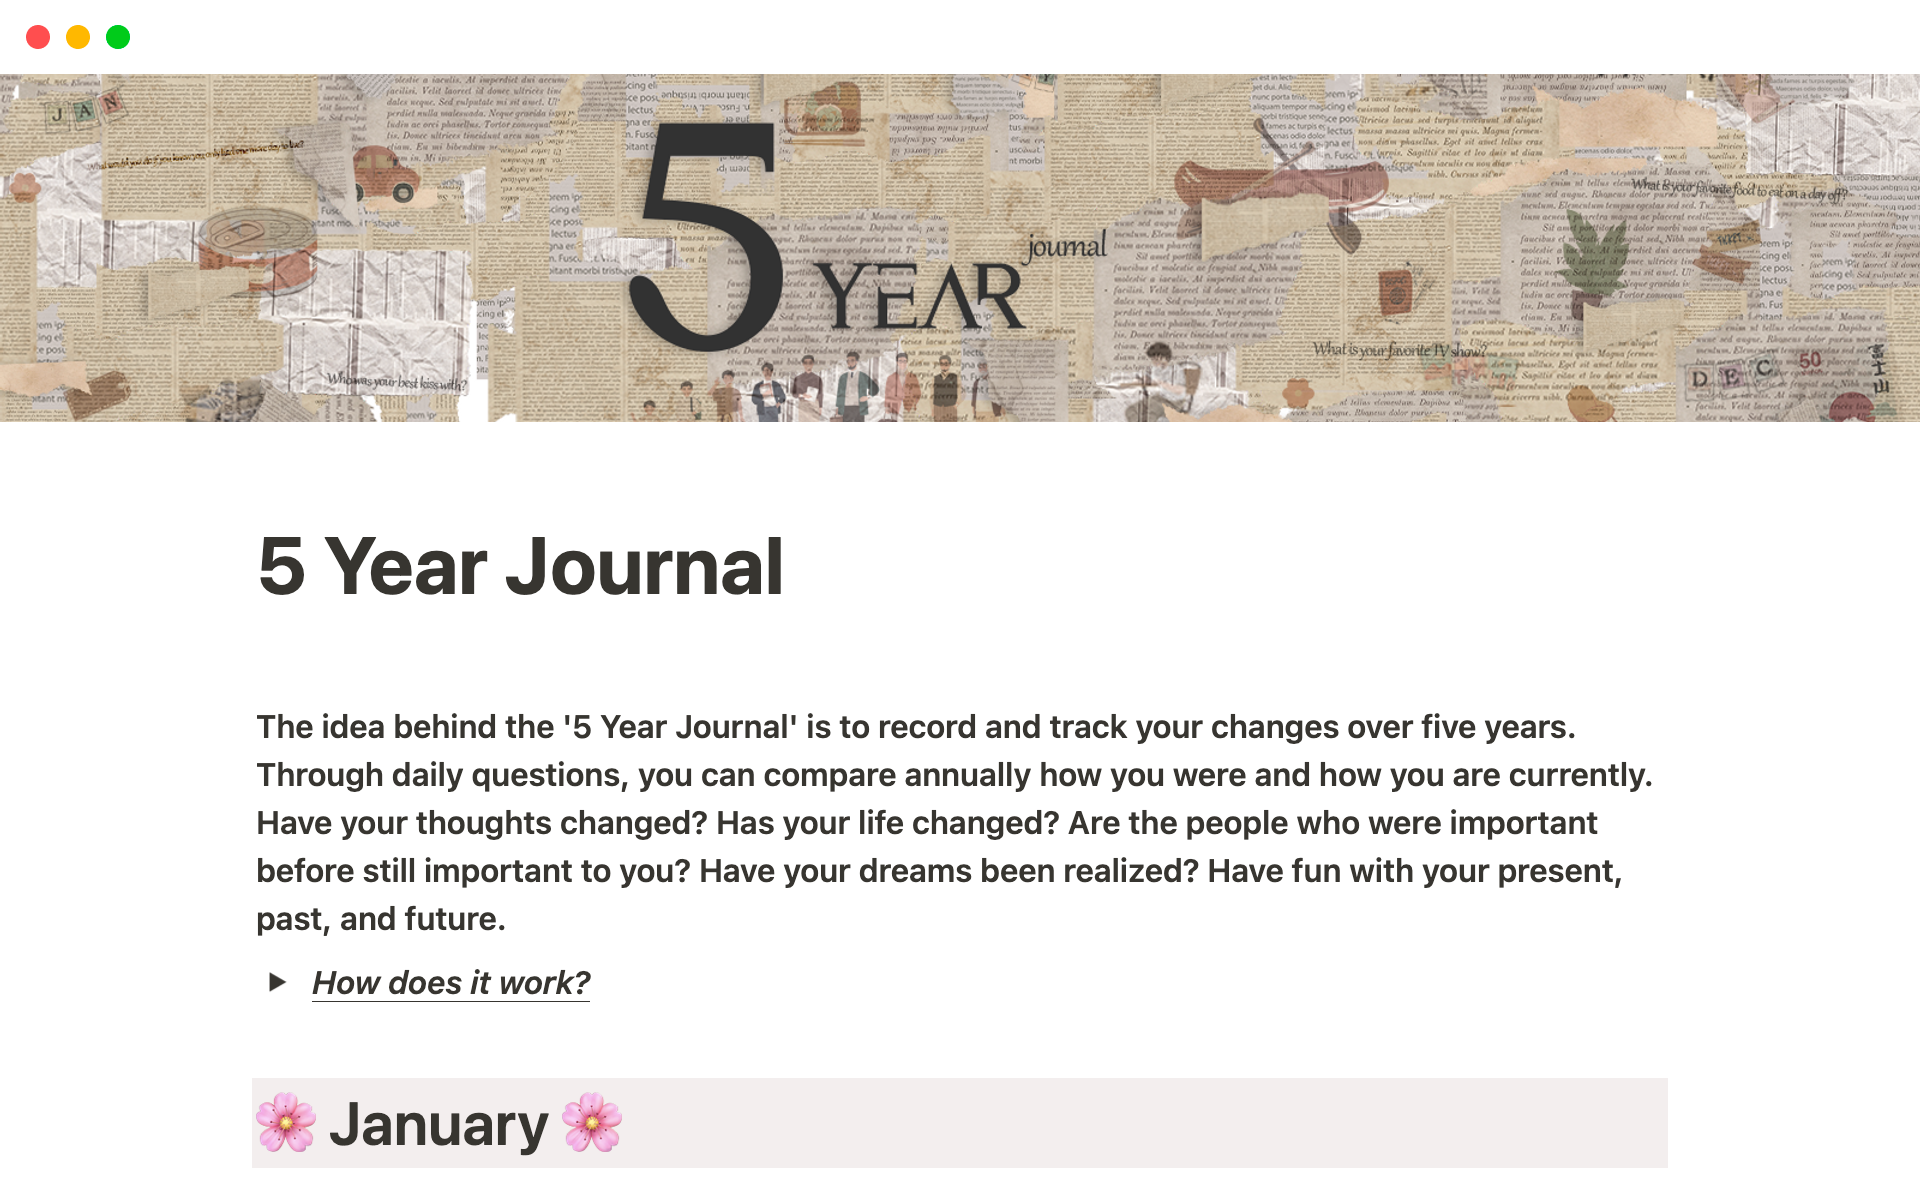 Introducing our 5-Year Diary Template: Capture your daily thoughts and compare your responses over time to track personal growth and evolution.